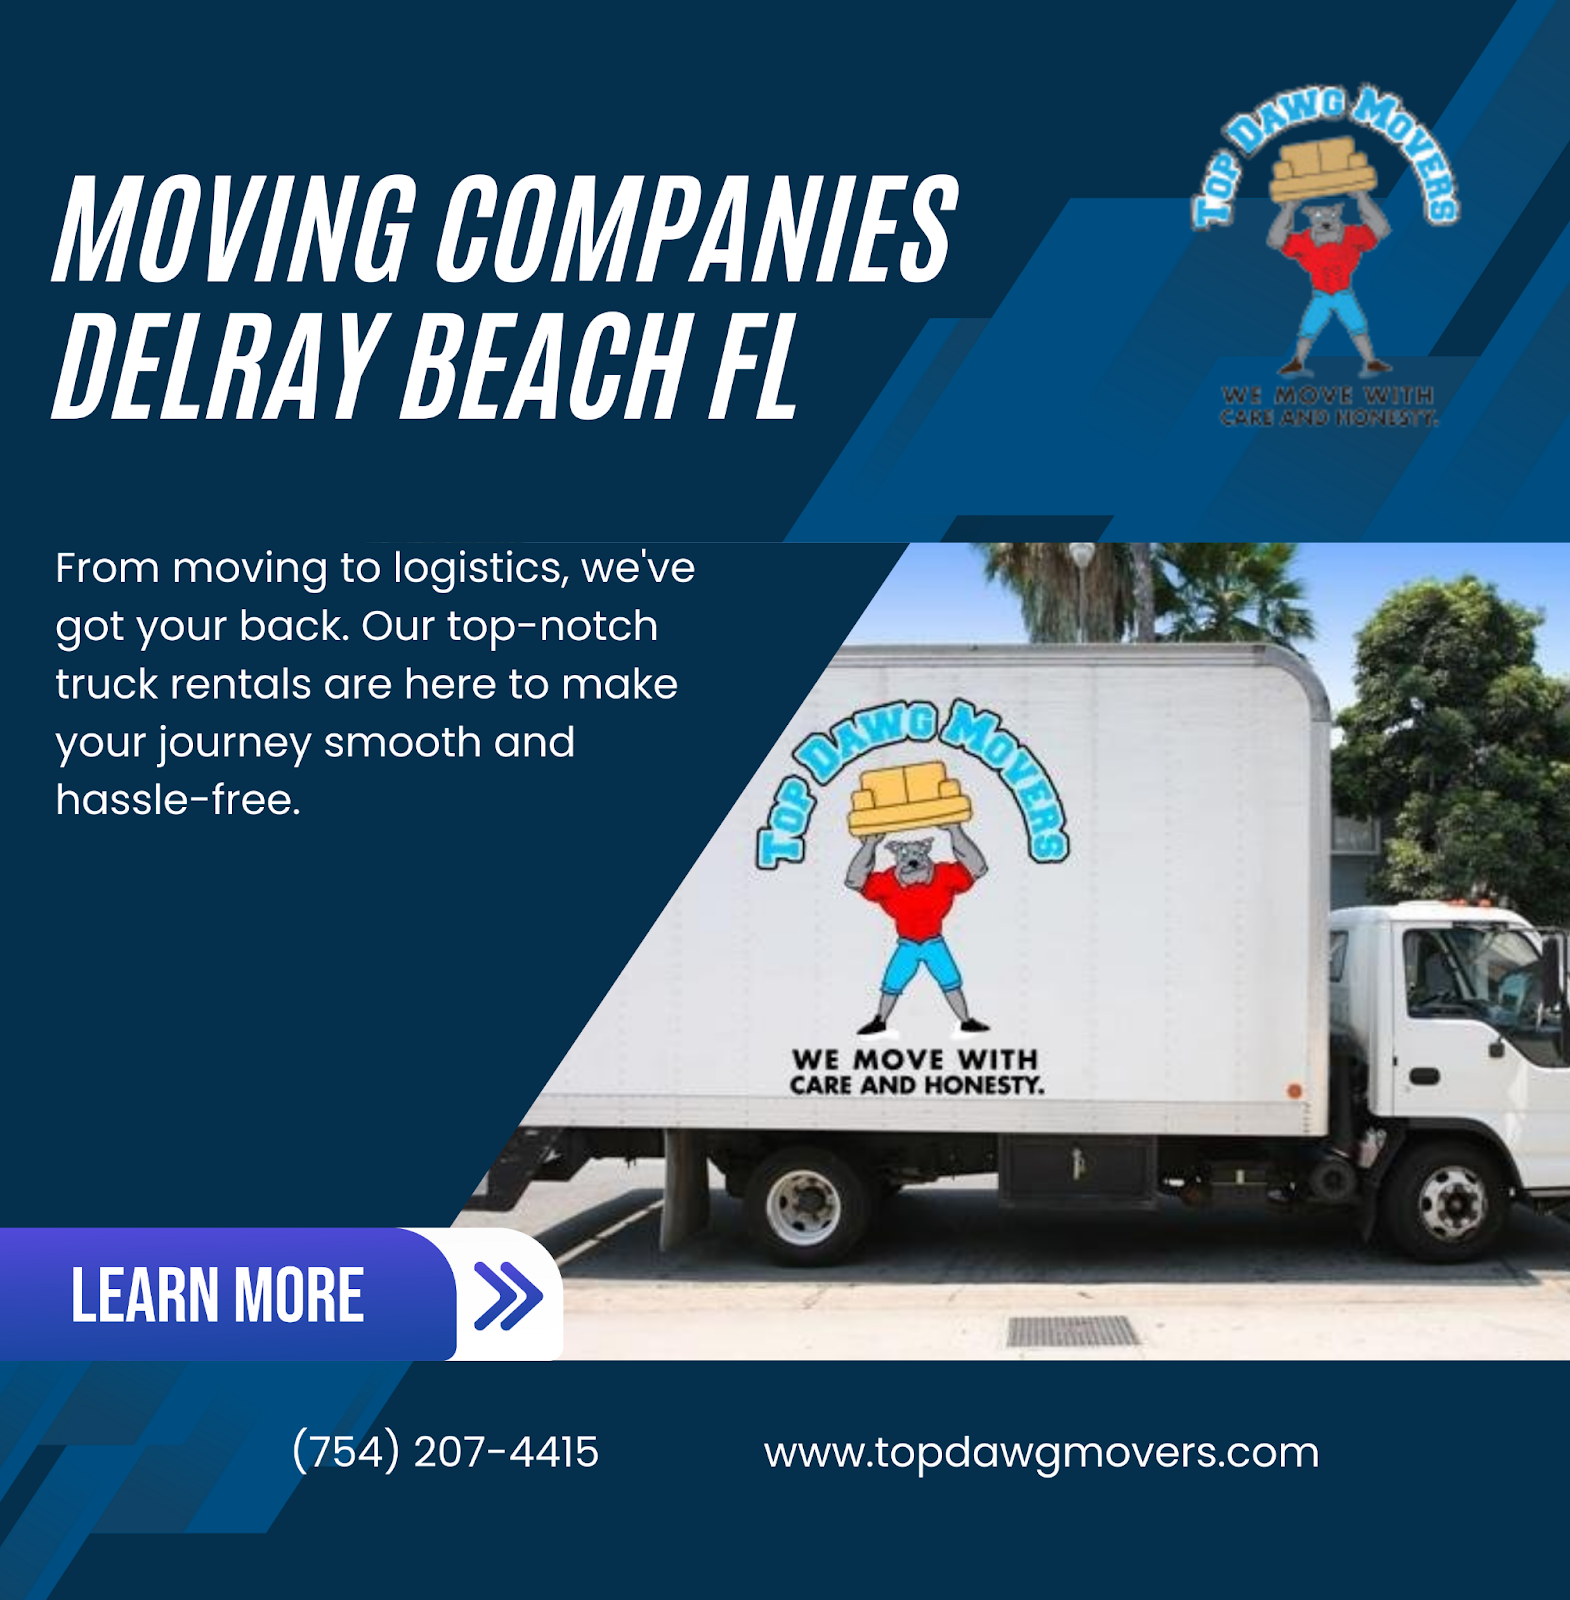 Moving Companies in Delray Beach, FL